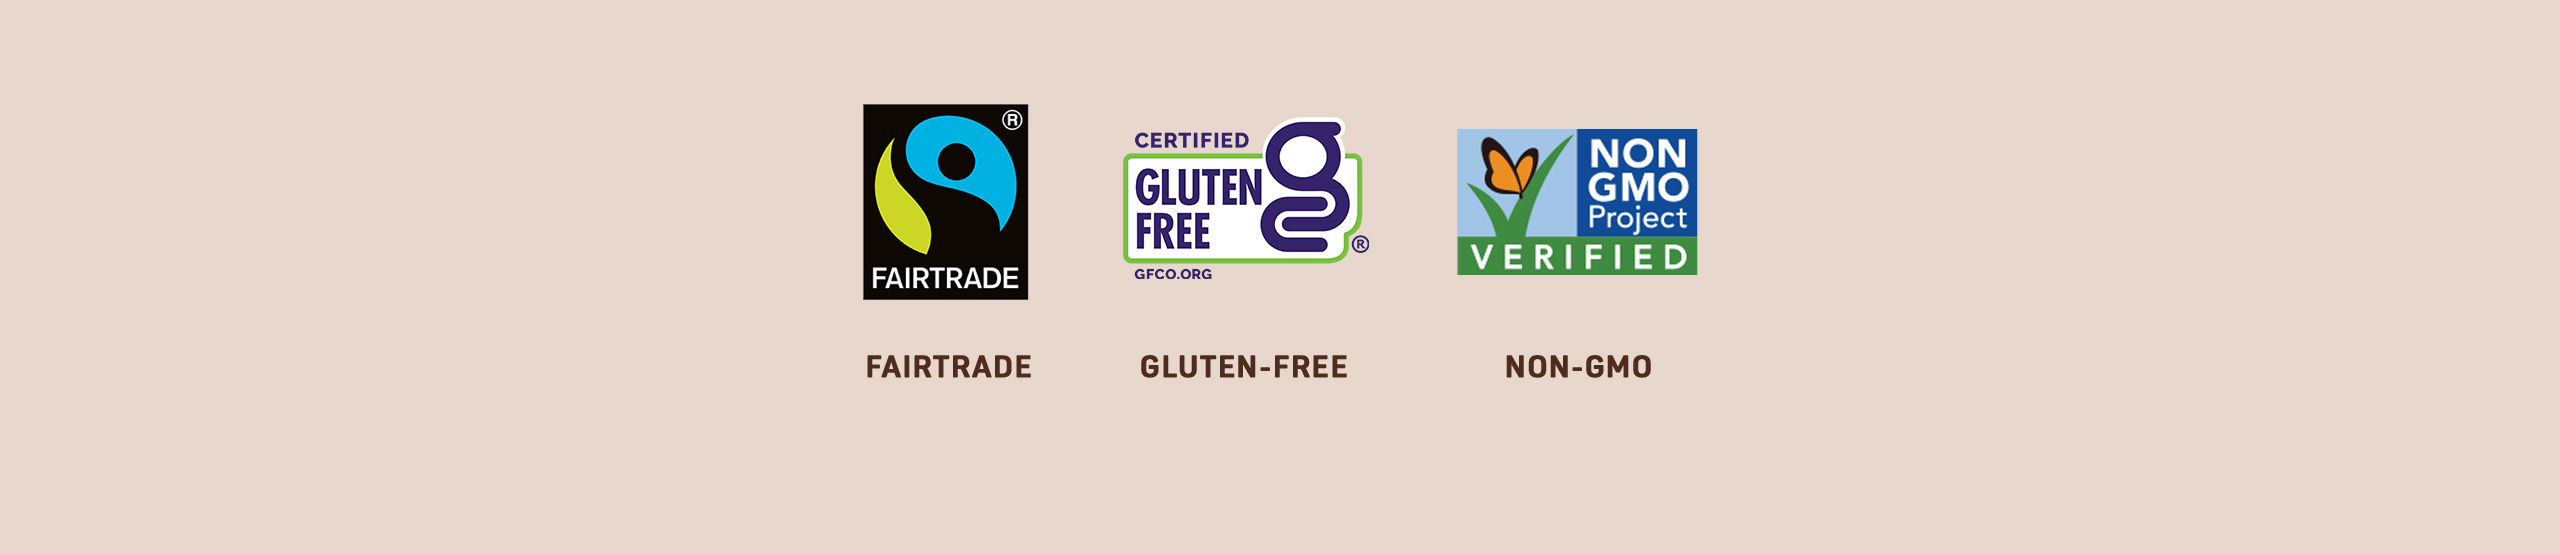 Line of logos; Awake products are Fairtrade, gluten-free, non-GMO, no artificial colors or flavors, kosher and trans fat free.